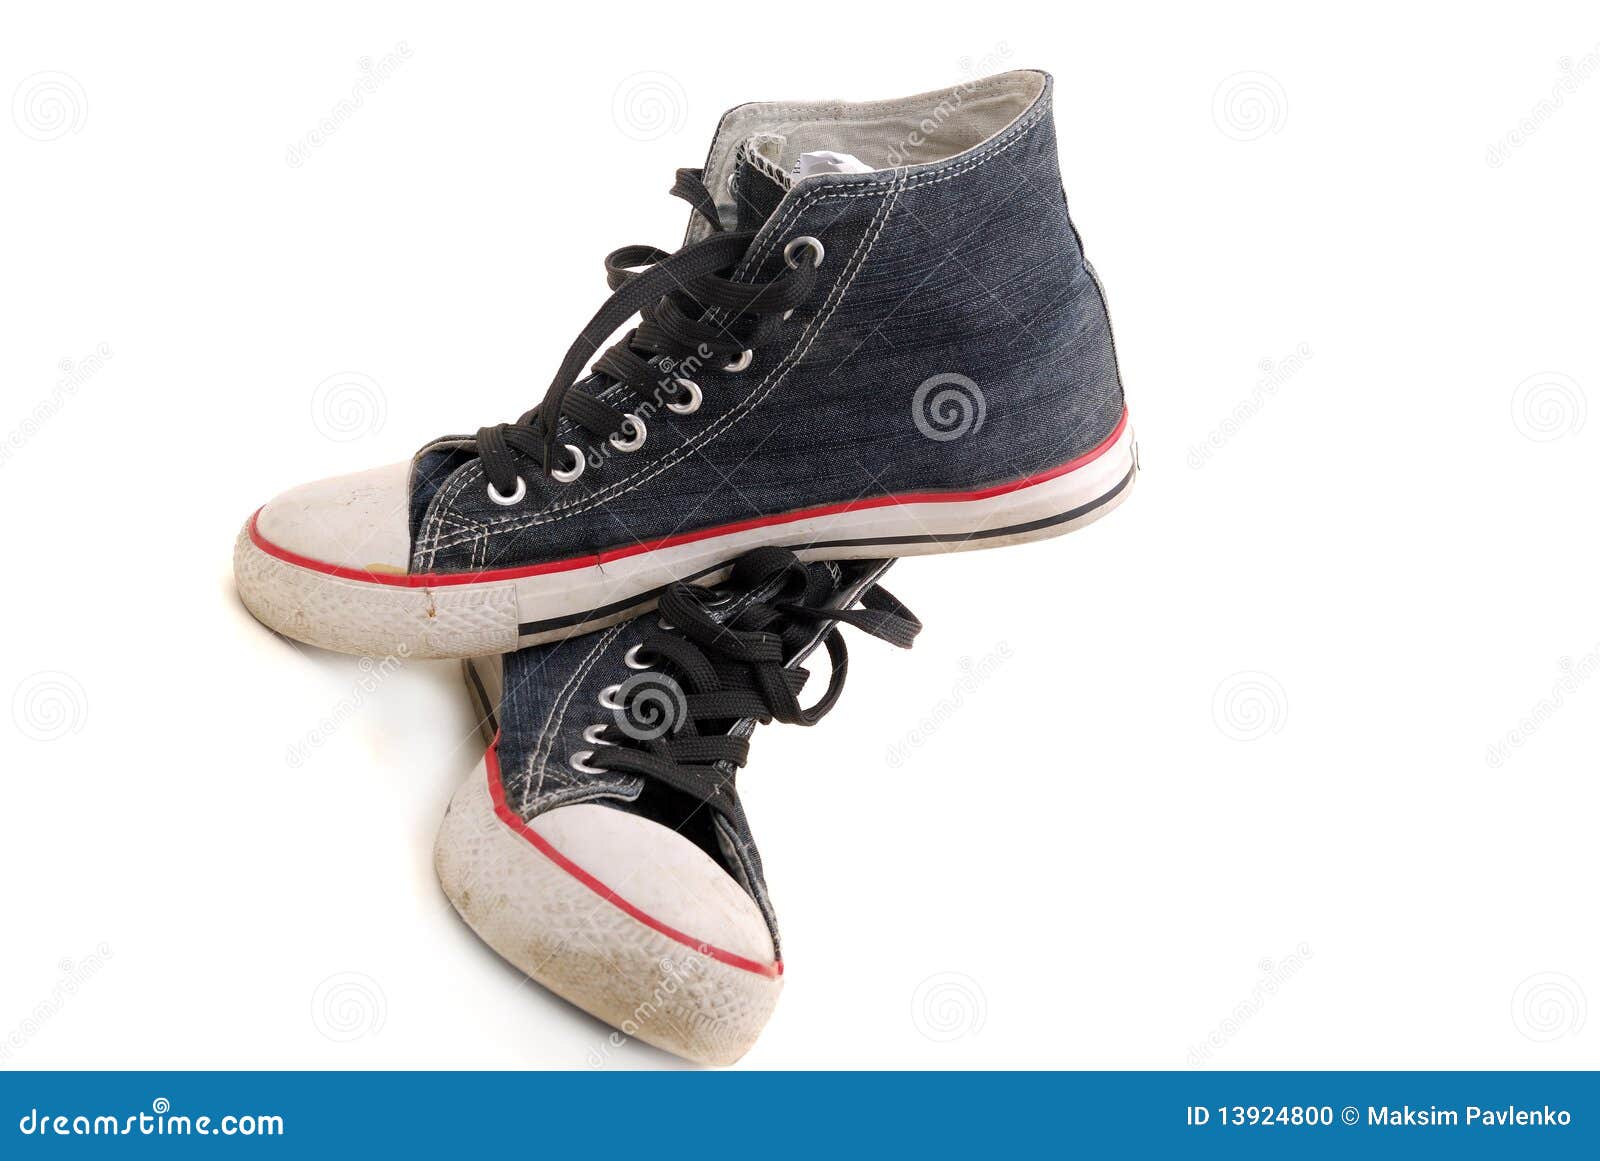 Old gym shoes stock photo. Image of cord, fitness, active - 13924800